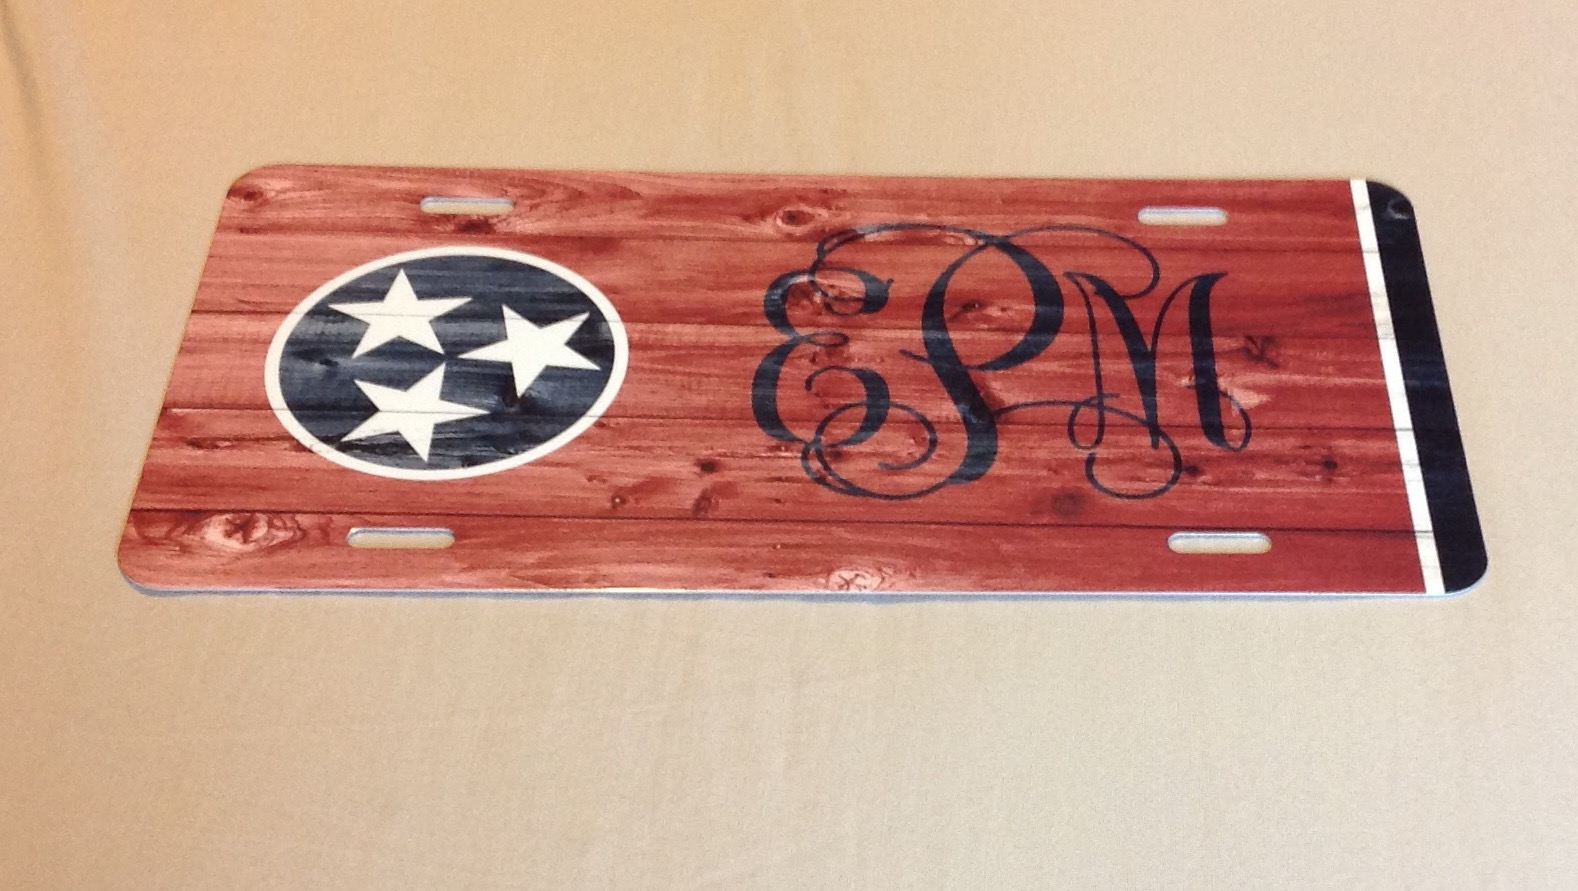 Rustic TN Flag Plate made with sublimation printing